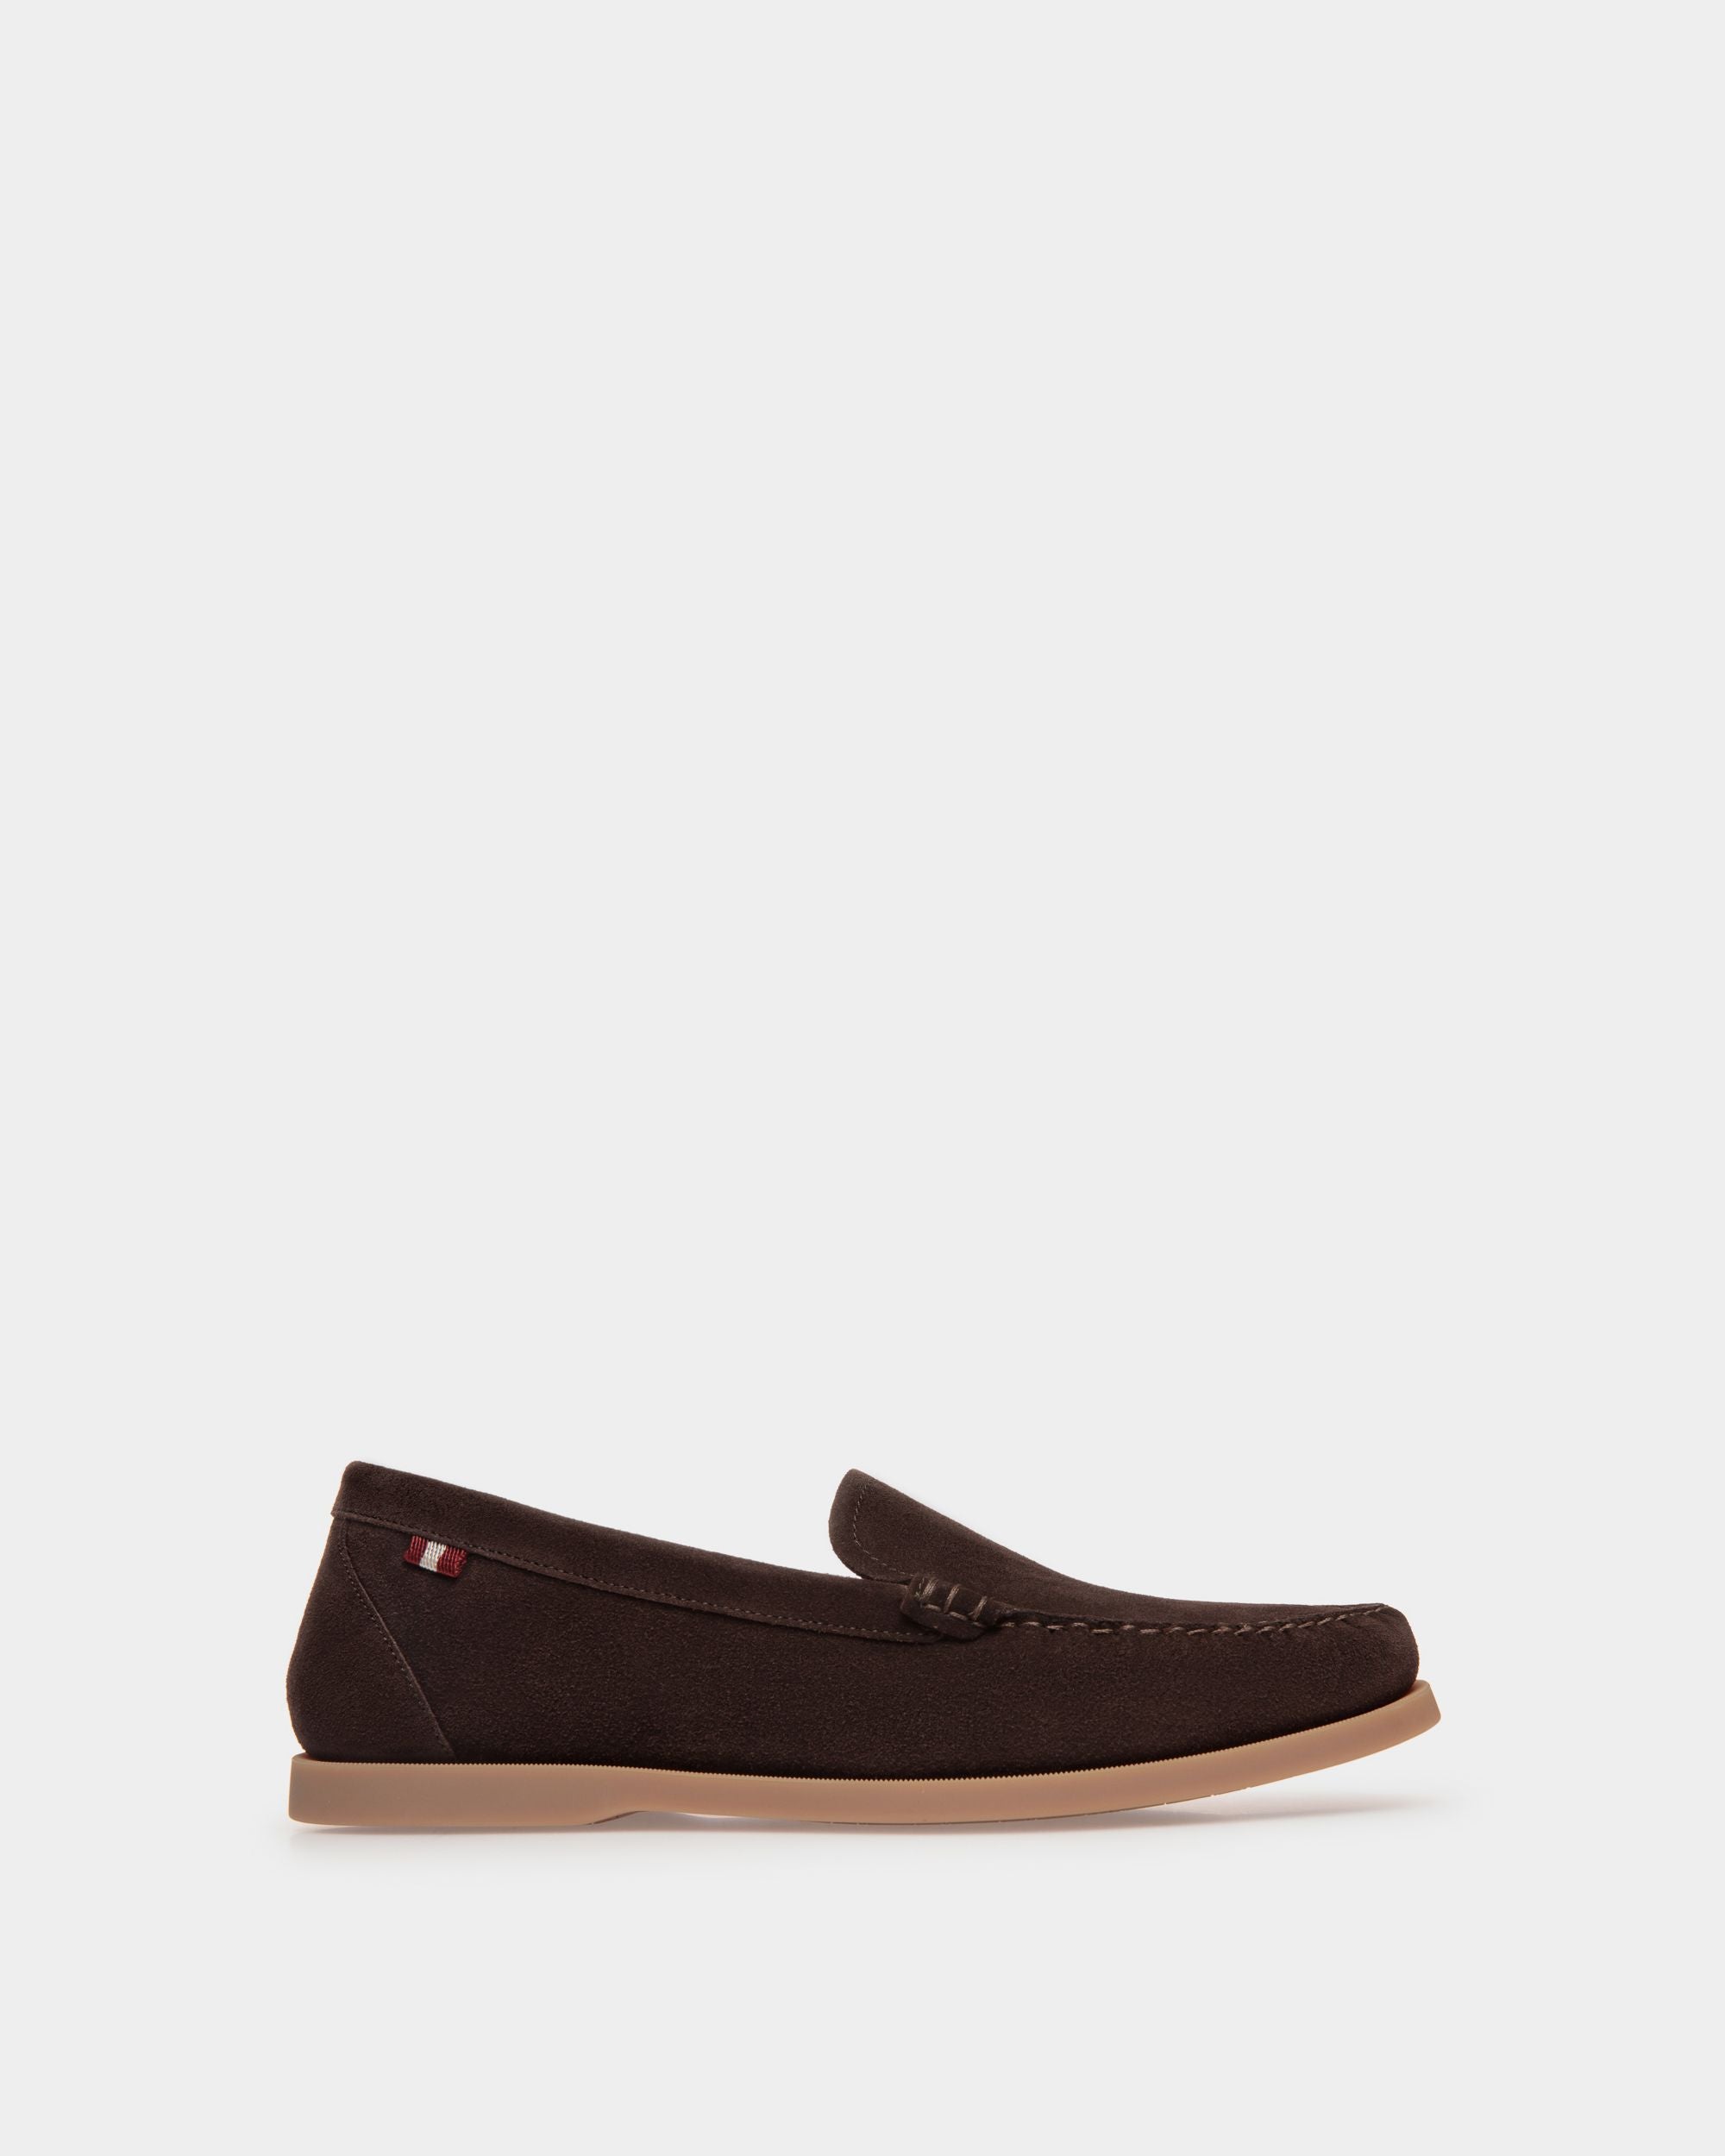 Nelson | Men's Loafer in Brown Suede | Bally | Still Life Side